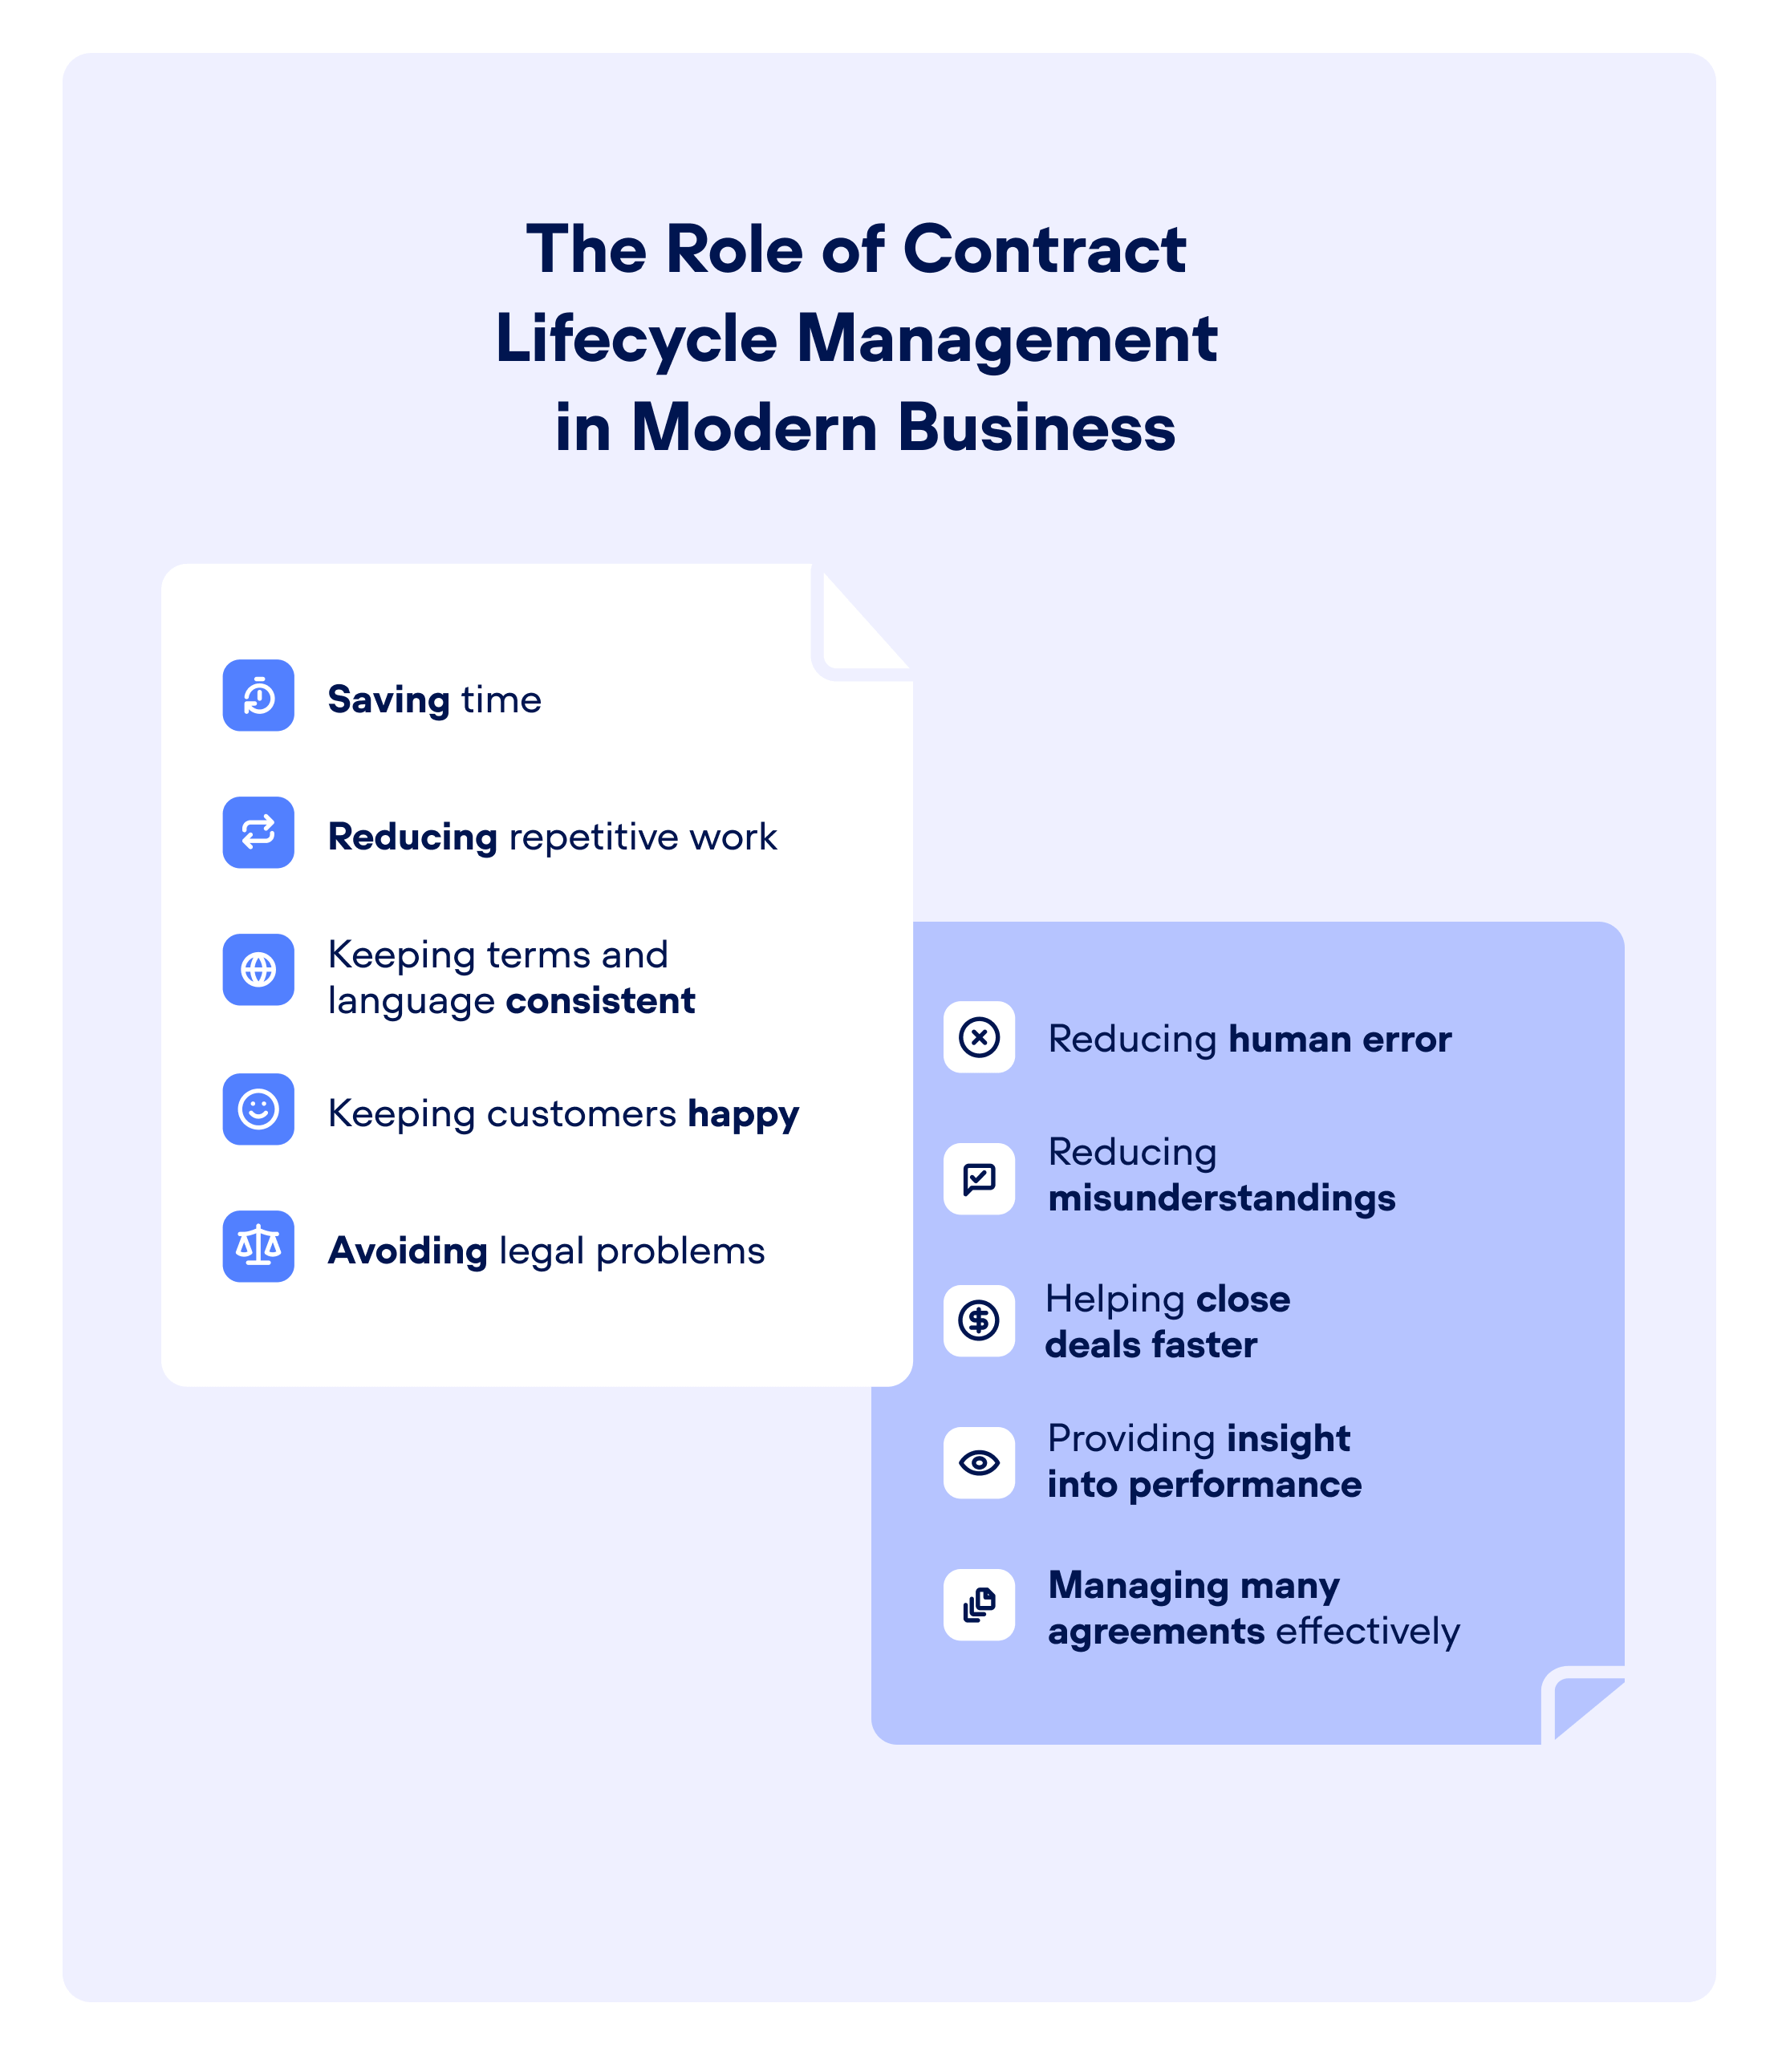 Infographic on 'The Role of Contract Lifecycle Management in Modern Business'. It showcases the key benefits of contract management for businesses, including: time-saving, minimizing repetitive tasks, ensuring consistent terms/language, enhancing customer satisfaction, preventing legal issues, cutting down human error, clarifying contract misunderstandings, expediting deal closures, offering performance insights, and managing multiple agreements efficiently.